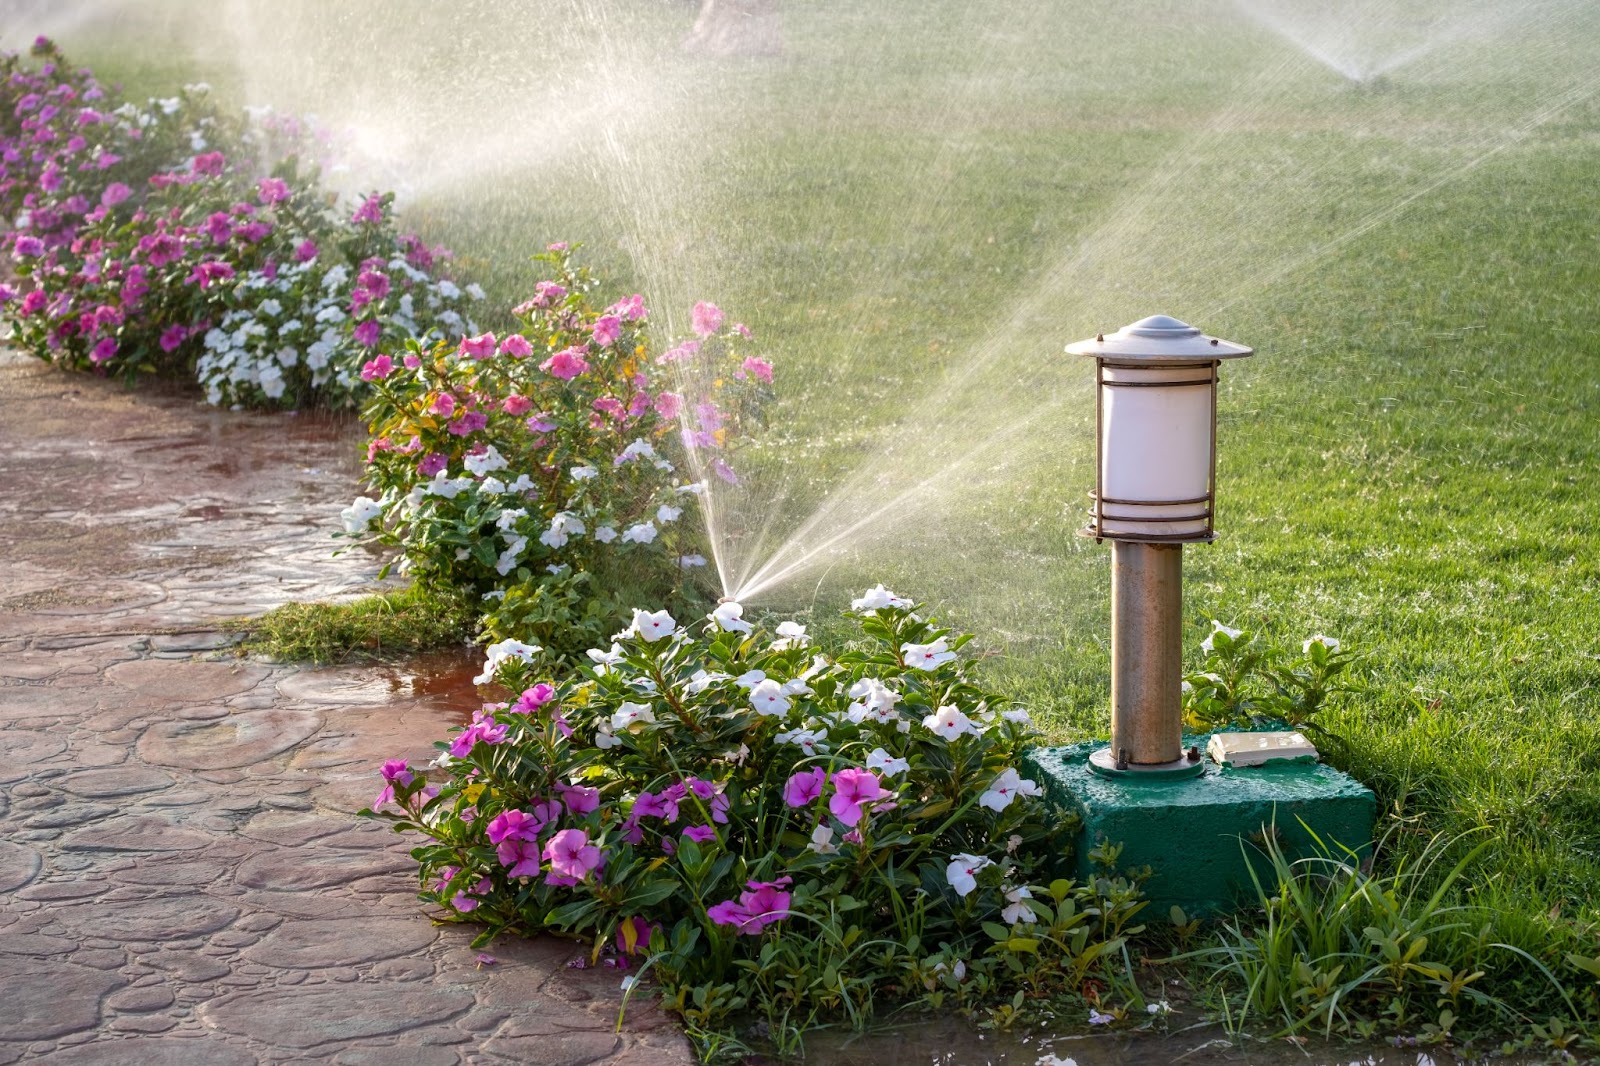 Sprinkler system watering a lawn for proper lawn care